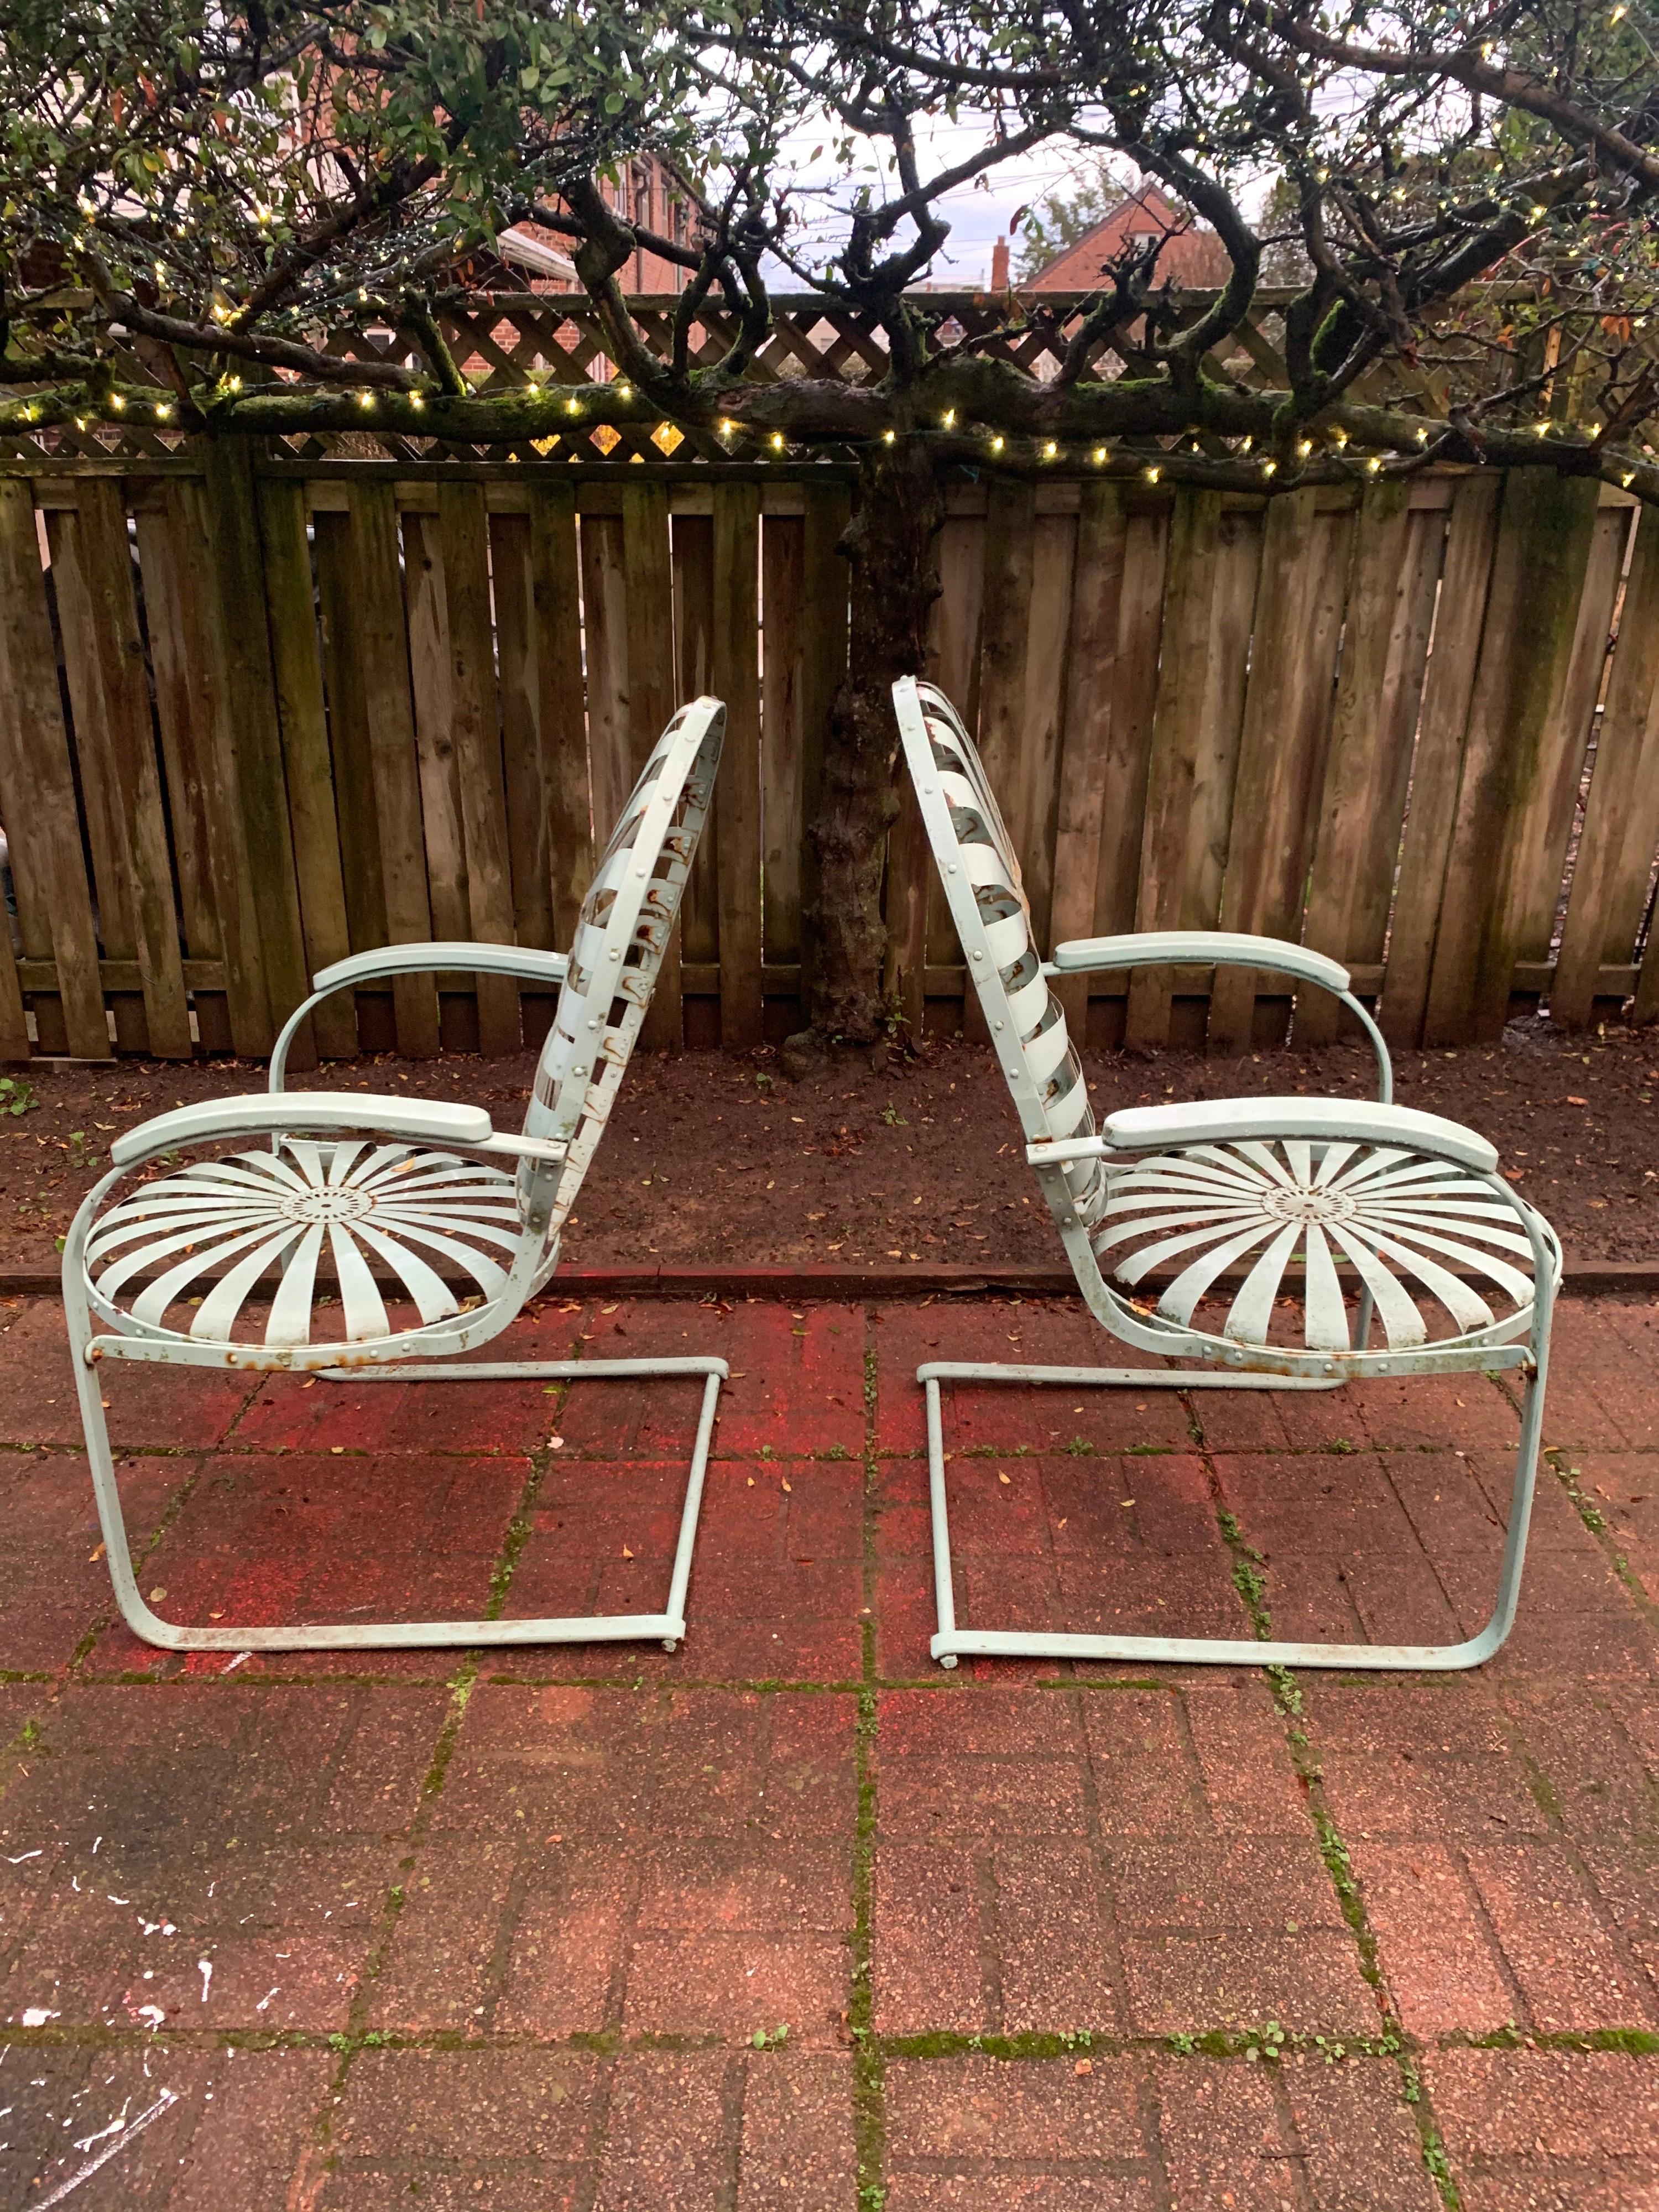 Fantastic pair of Francois Carre sunburst bouncer lounge chairs. 

These chairs are more than just good-looking. 

They are curiously some of the most comfortable lounge chairs we have test-driven. No cushions needed.

Their simple bent-steel